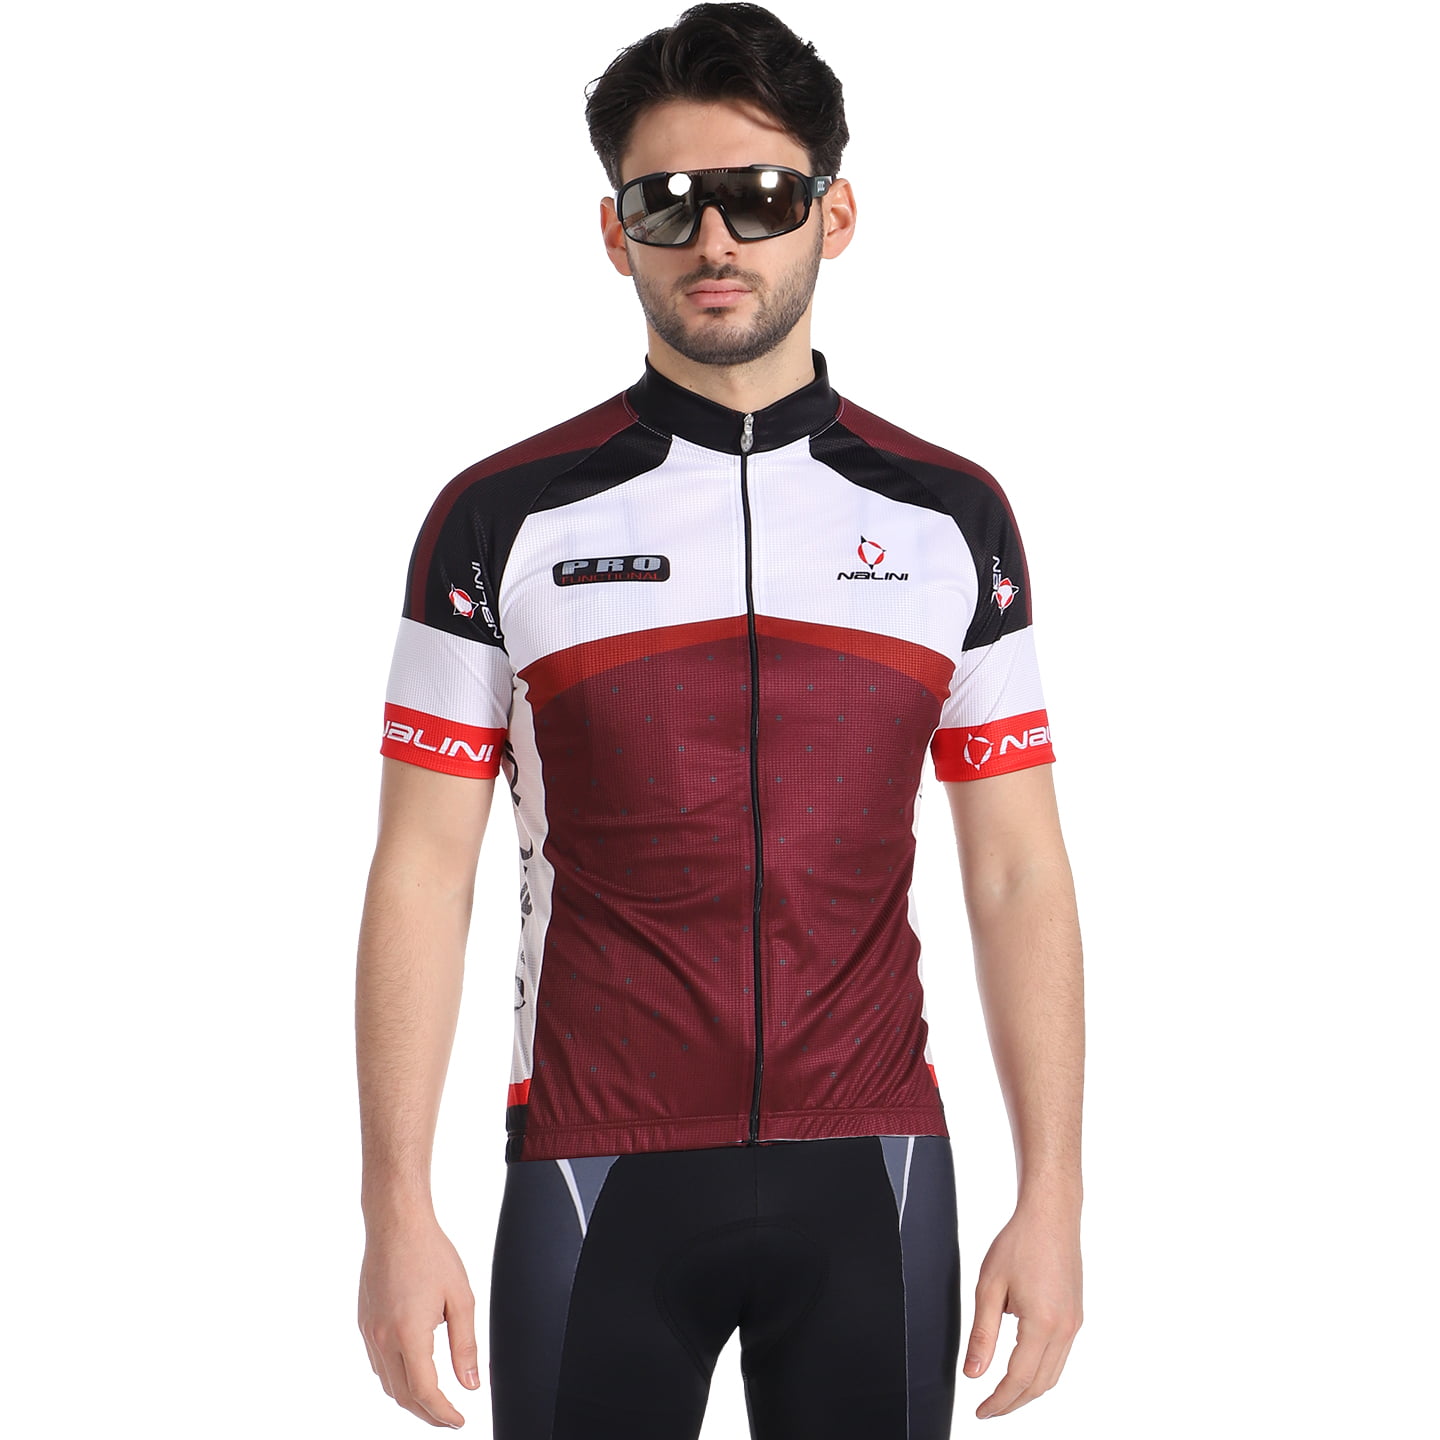 NALINI Ergo 2 Short Sleeve Jersey, for men, size 3XL, Cycling jersey, Cycle clothing